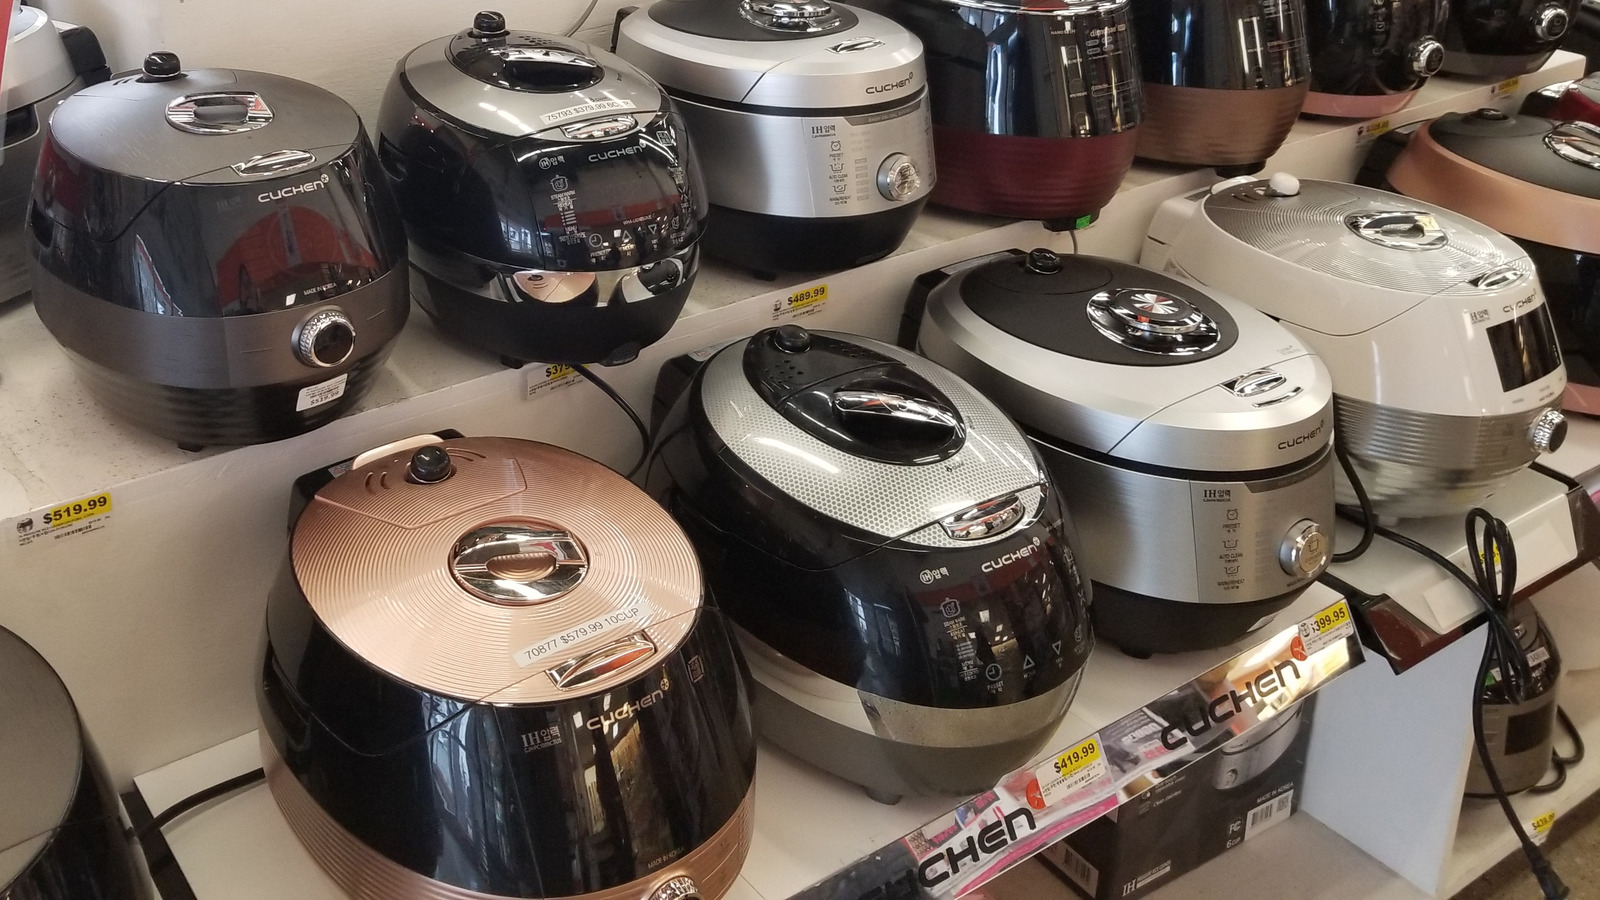 https://www.thedailymeal.com/img/gallery/the-13-best-rice-cookers-to-buy-in-2023/l-intro-1673617762.jpg